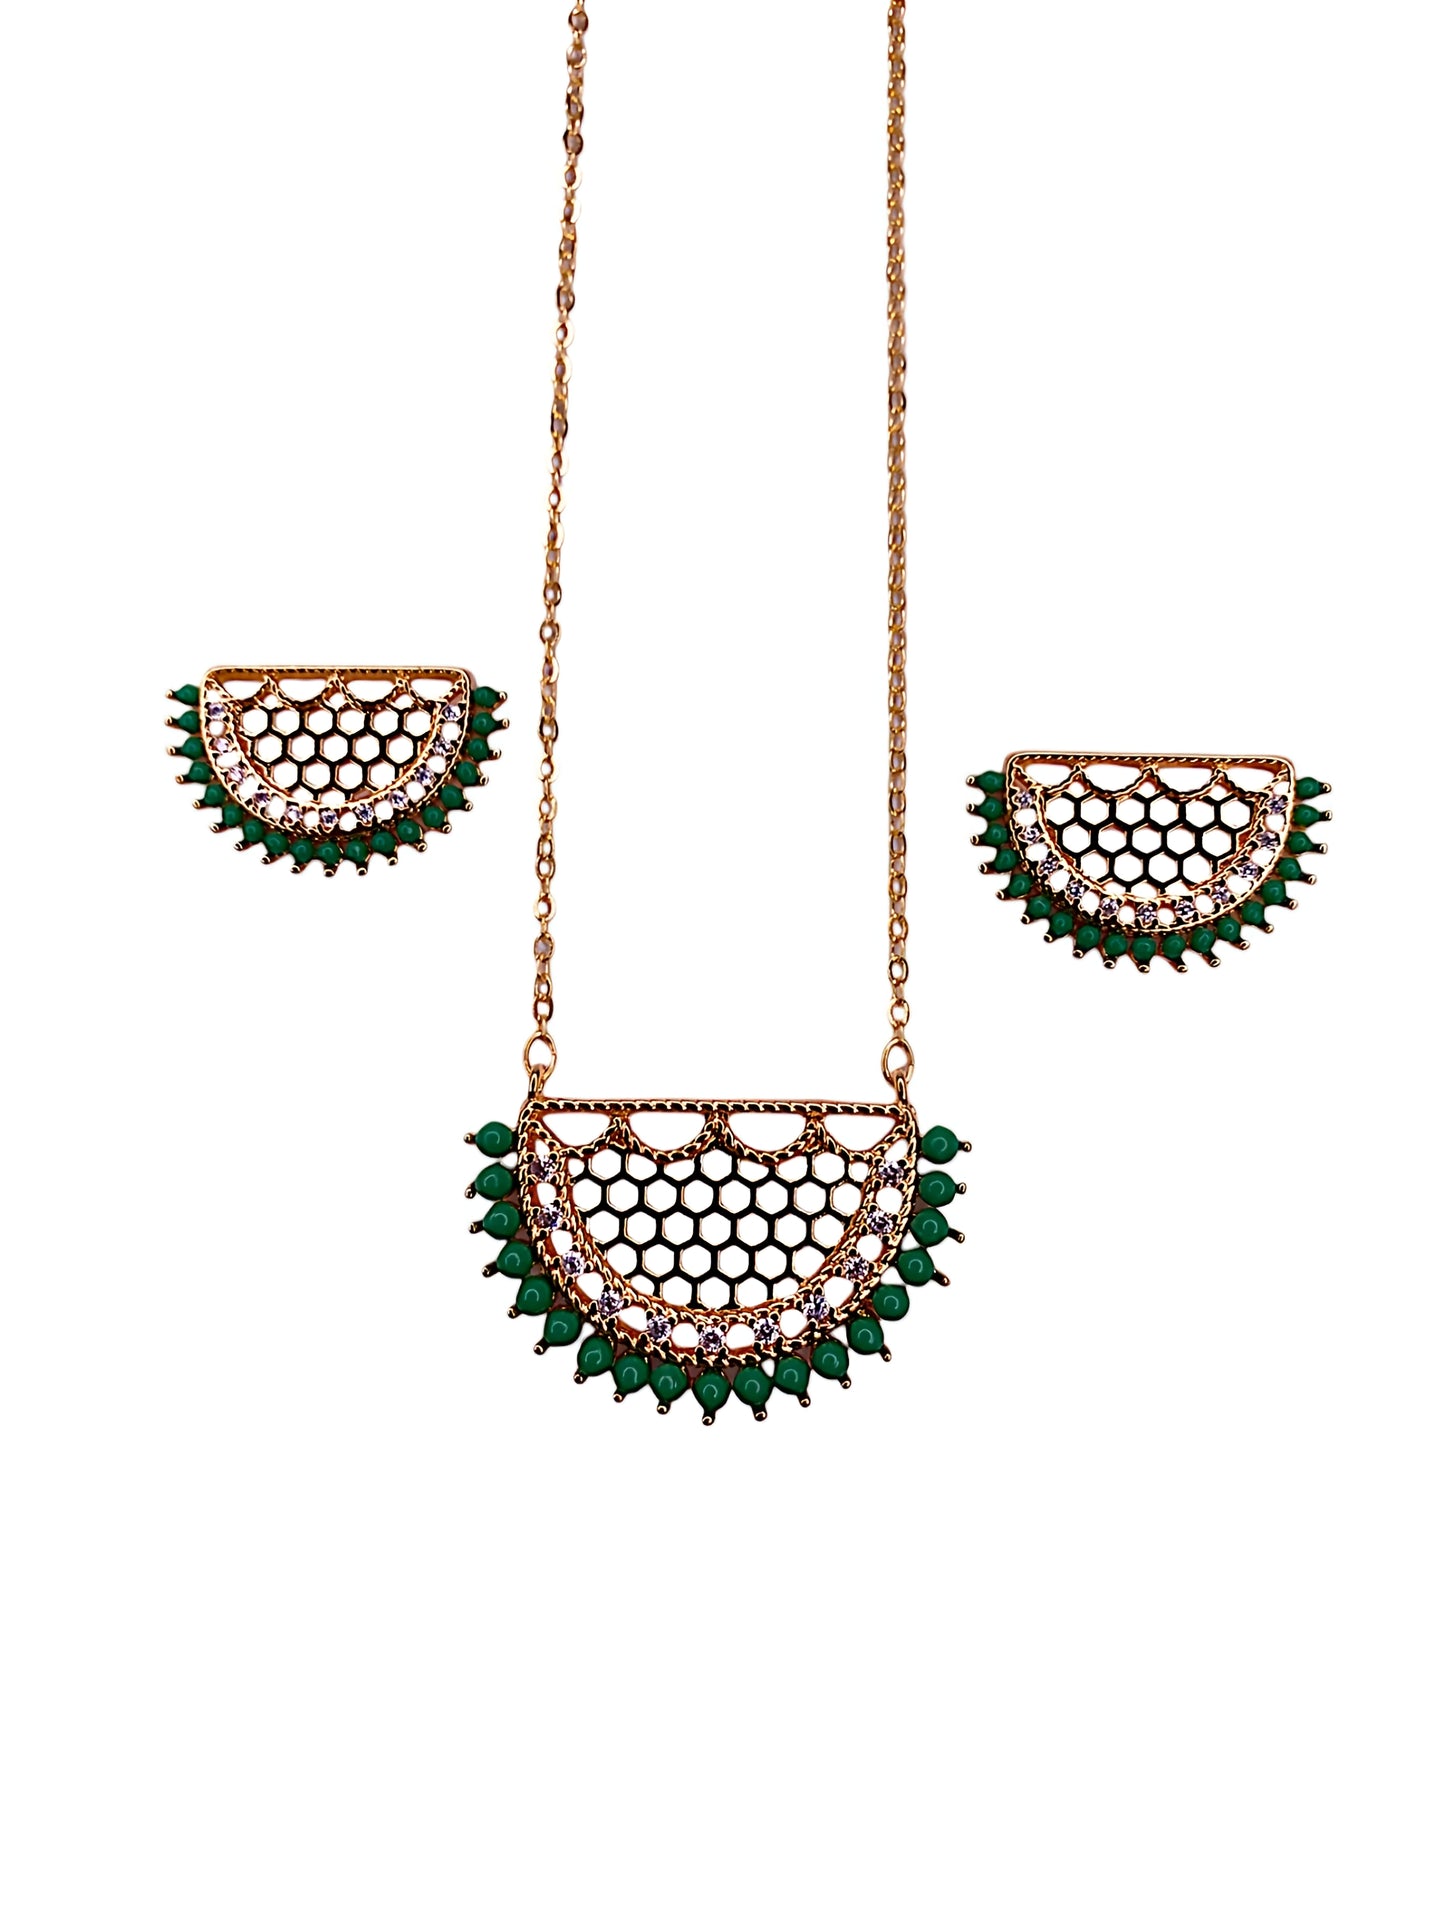 Arabian Style Pendant Set with Green Beads and Stones